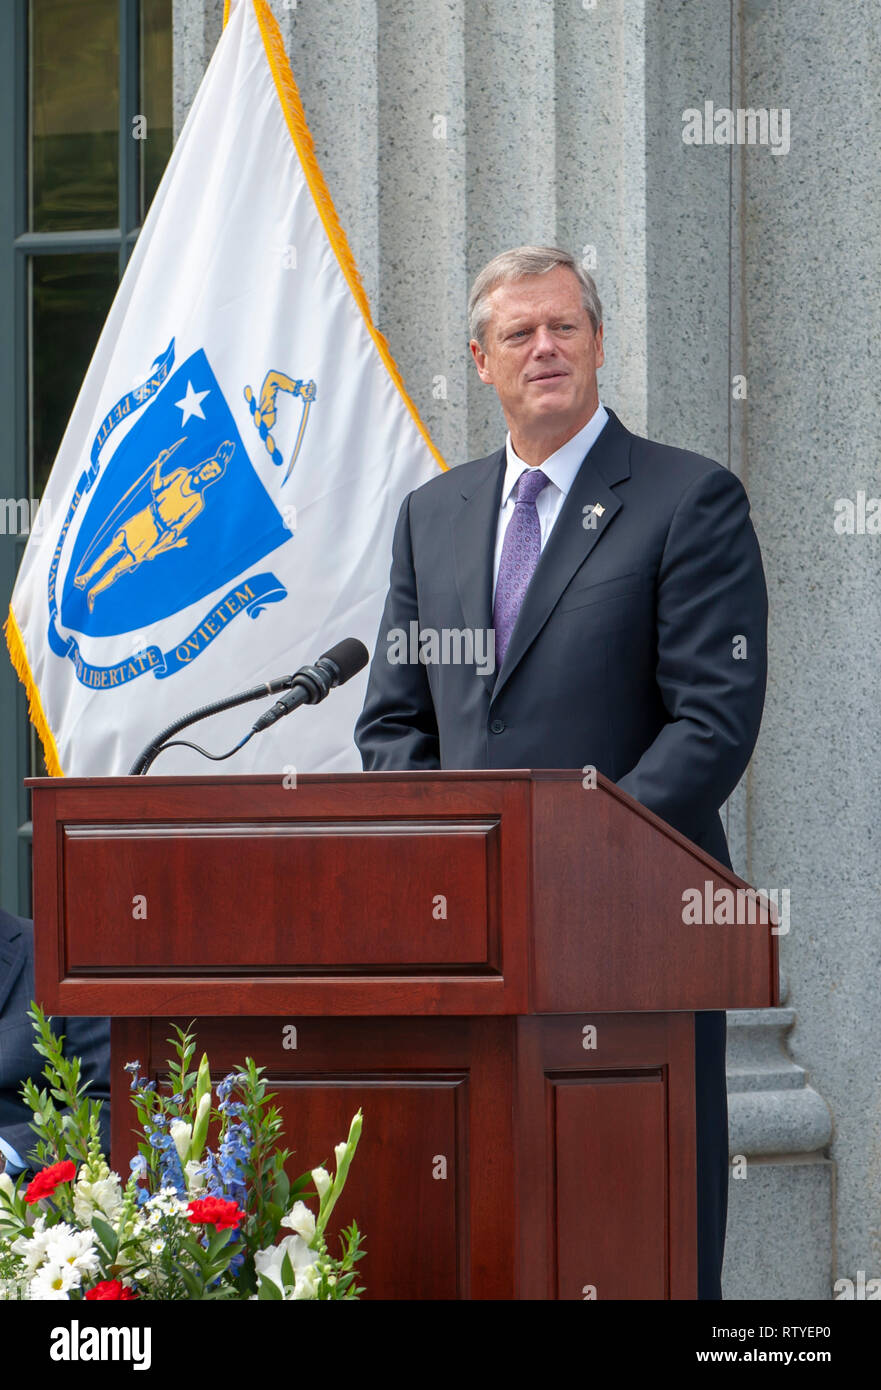 Governor Charlie Baker speaking at the opening of Hancock Adams Common in Quincy, Massachusetts. Stock Photo